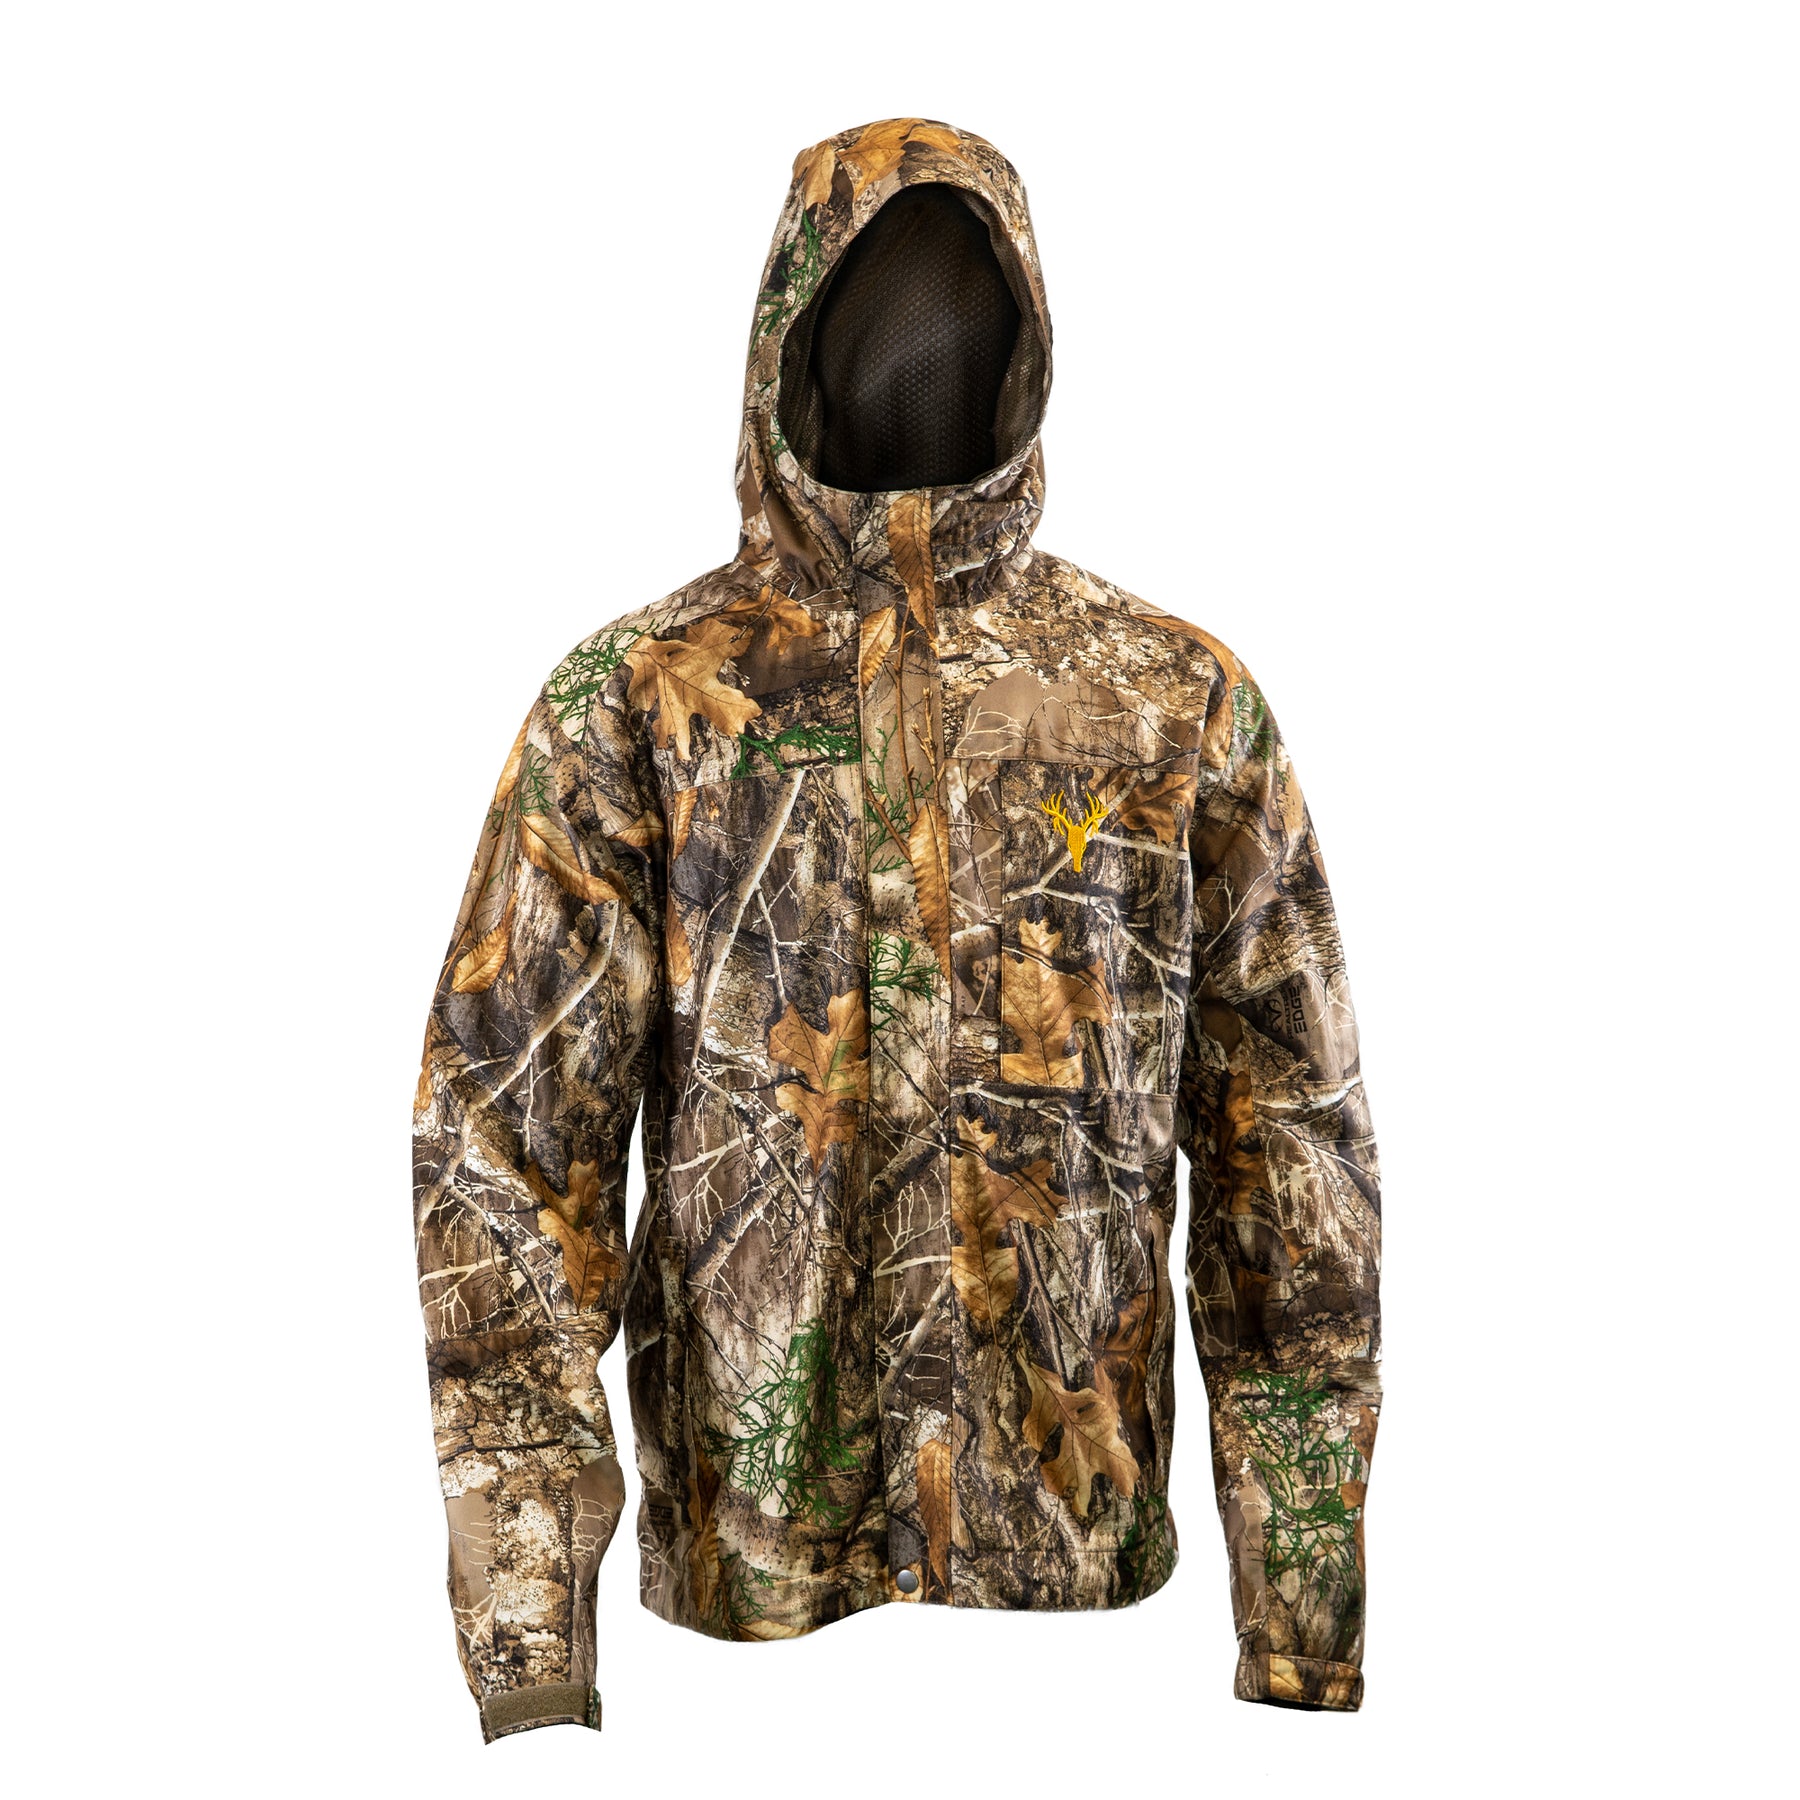 Hot Shot Mens Camo Rain Jacket Realtree Edge Waterproof Hunting Outdoor Apparel, X-Large, Men's, Size: XL, Other